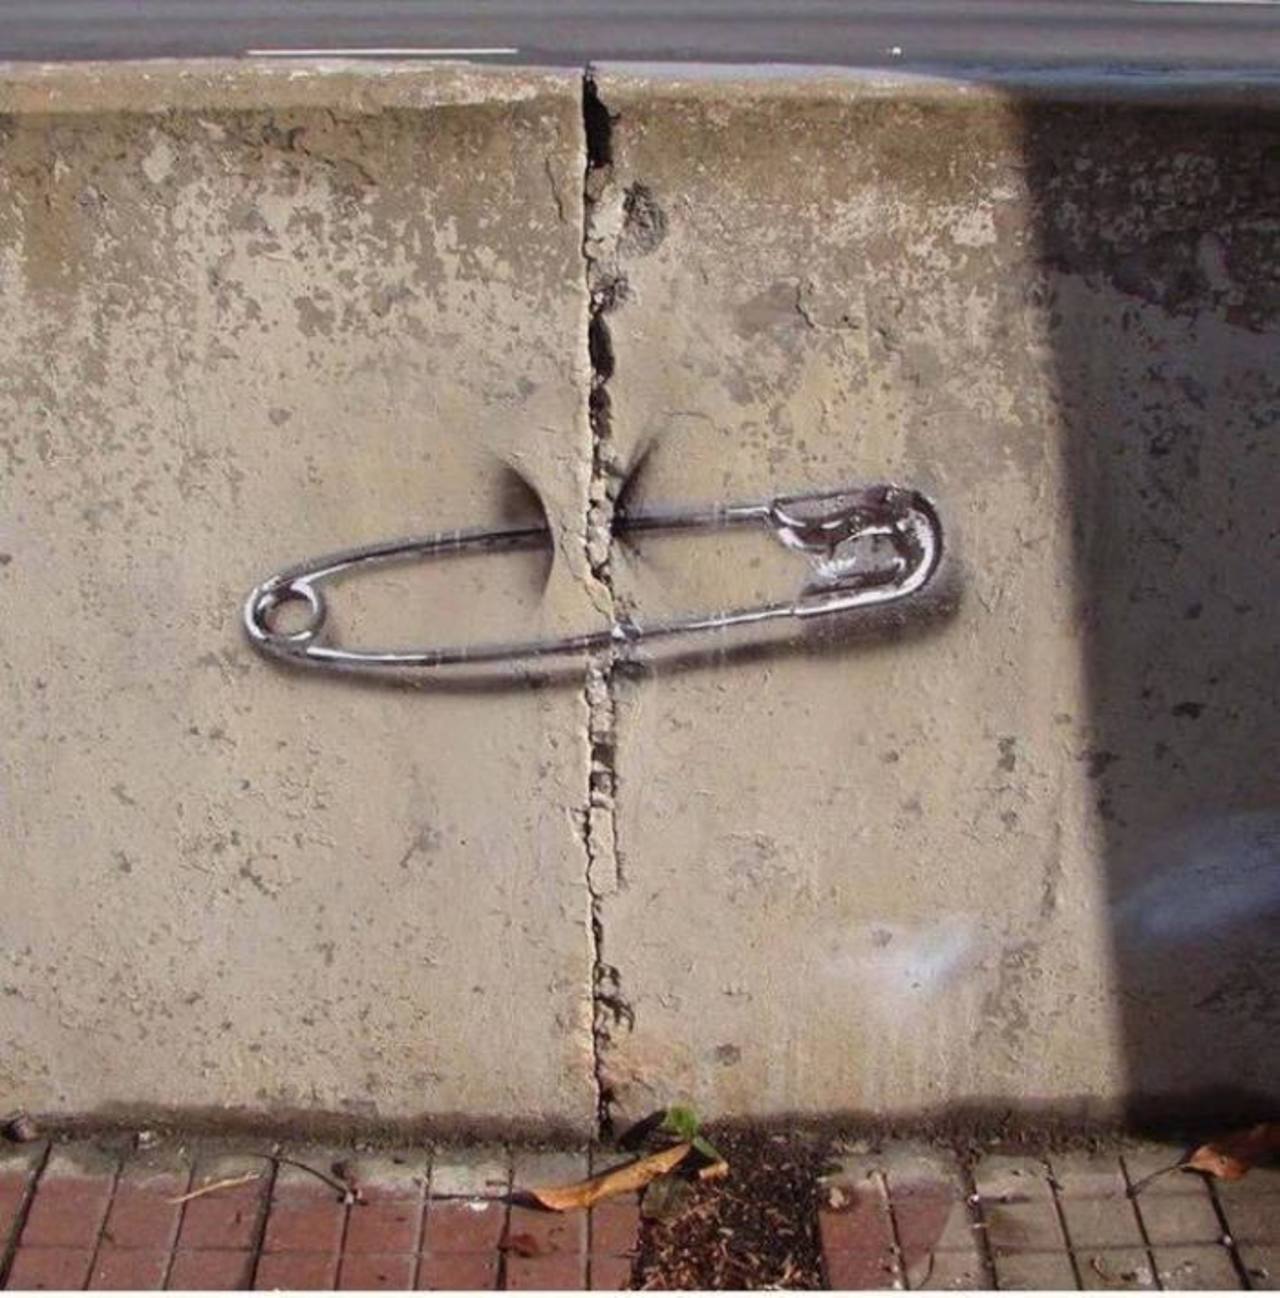 Simple & Beauty – #Creative #Streetart | Be ▲rtist - Be ▲rt https://beartistbeart.com/2016/08/25/simple-beauty-creative-streetart/?utm_campaign=crowdfire&utm_content=crowdfire&utm_medium=social&utm_source=twitter https://t.co/iq5aY5CUn4